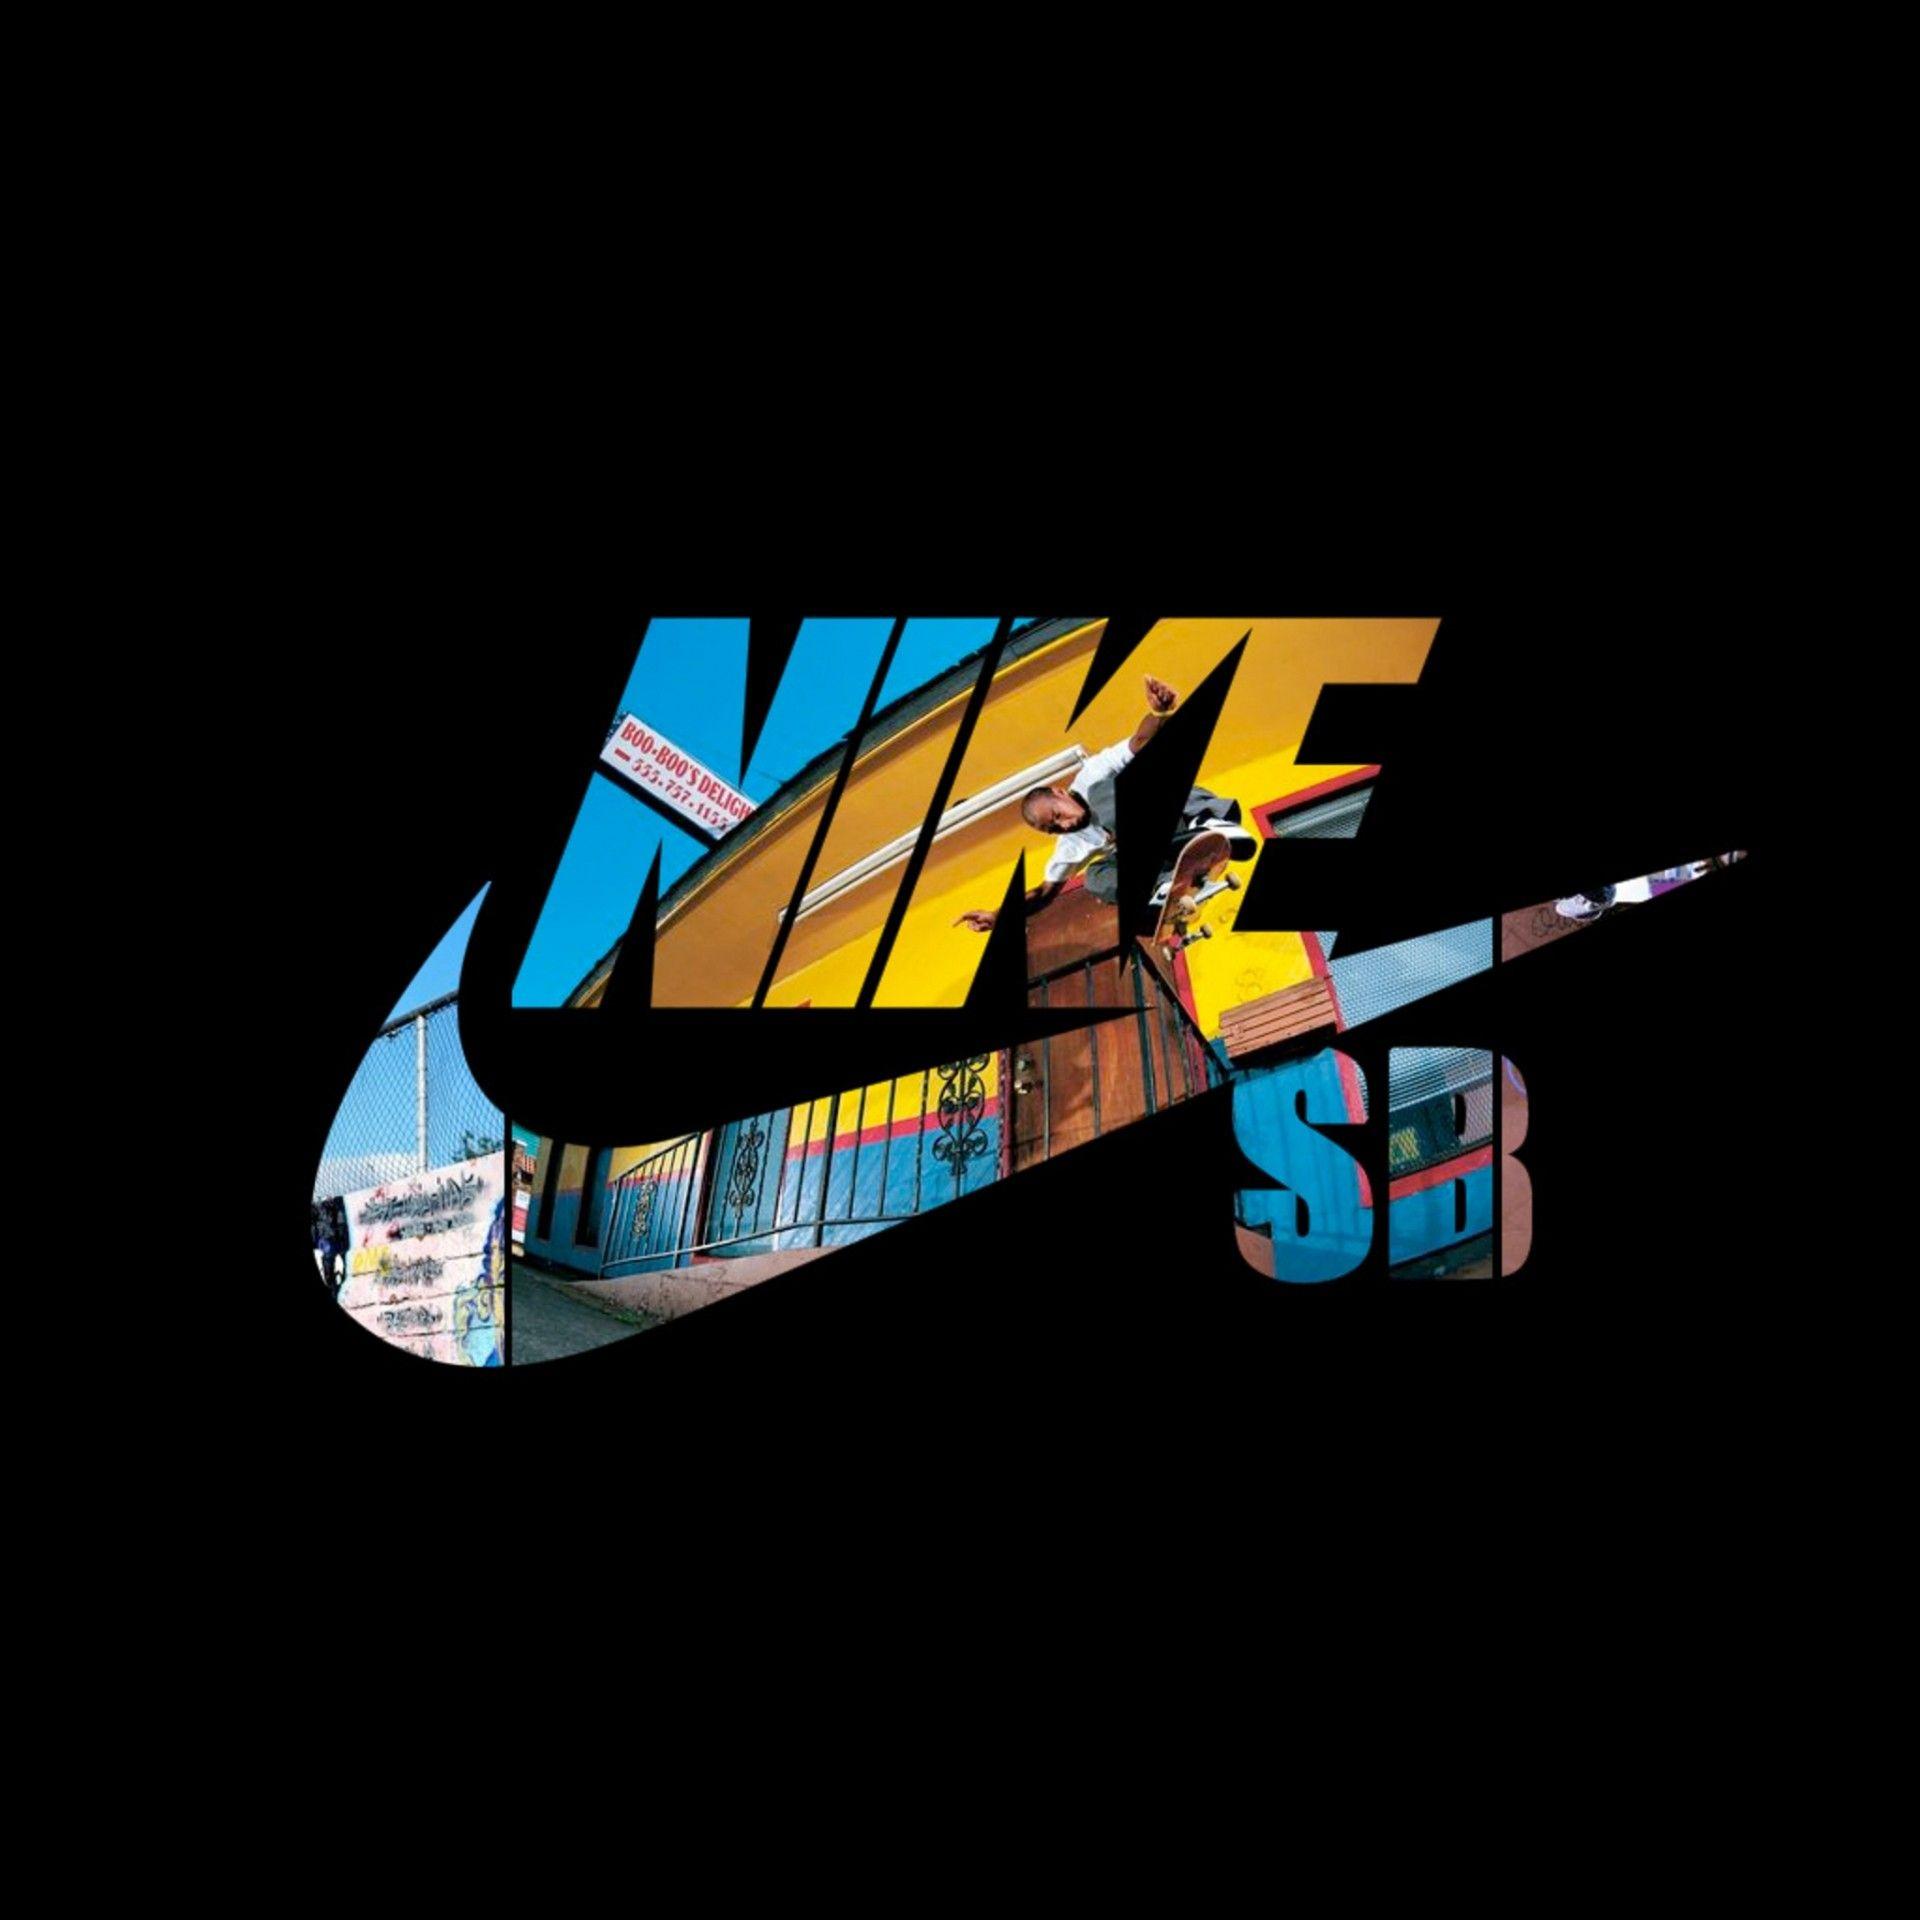 Free download Cool Nike Wallpapers HD 